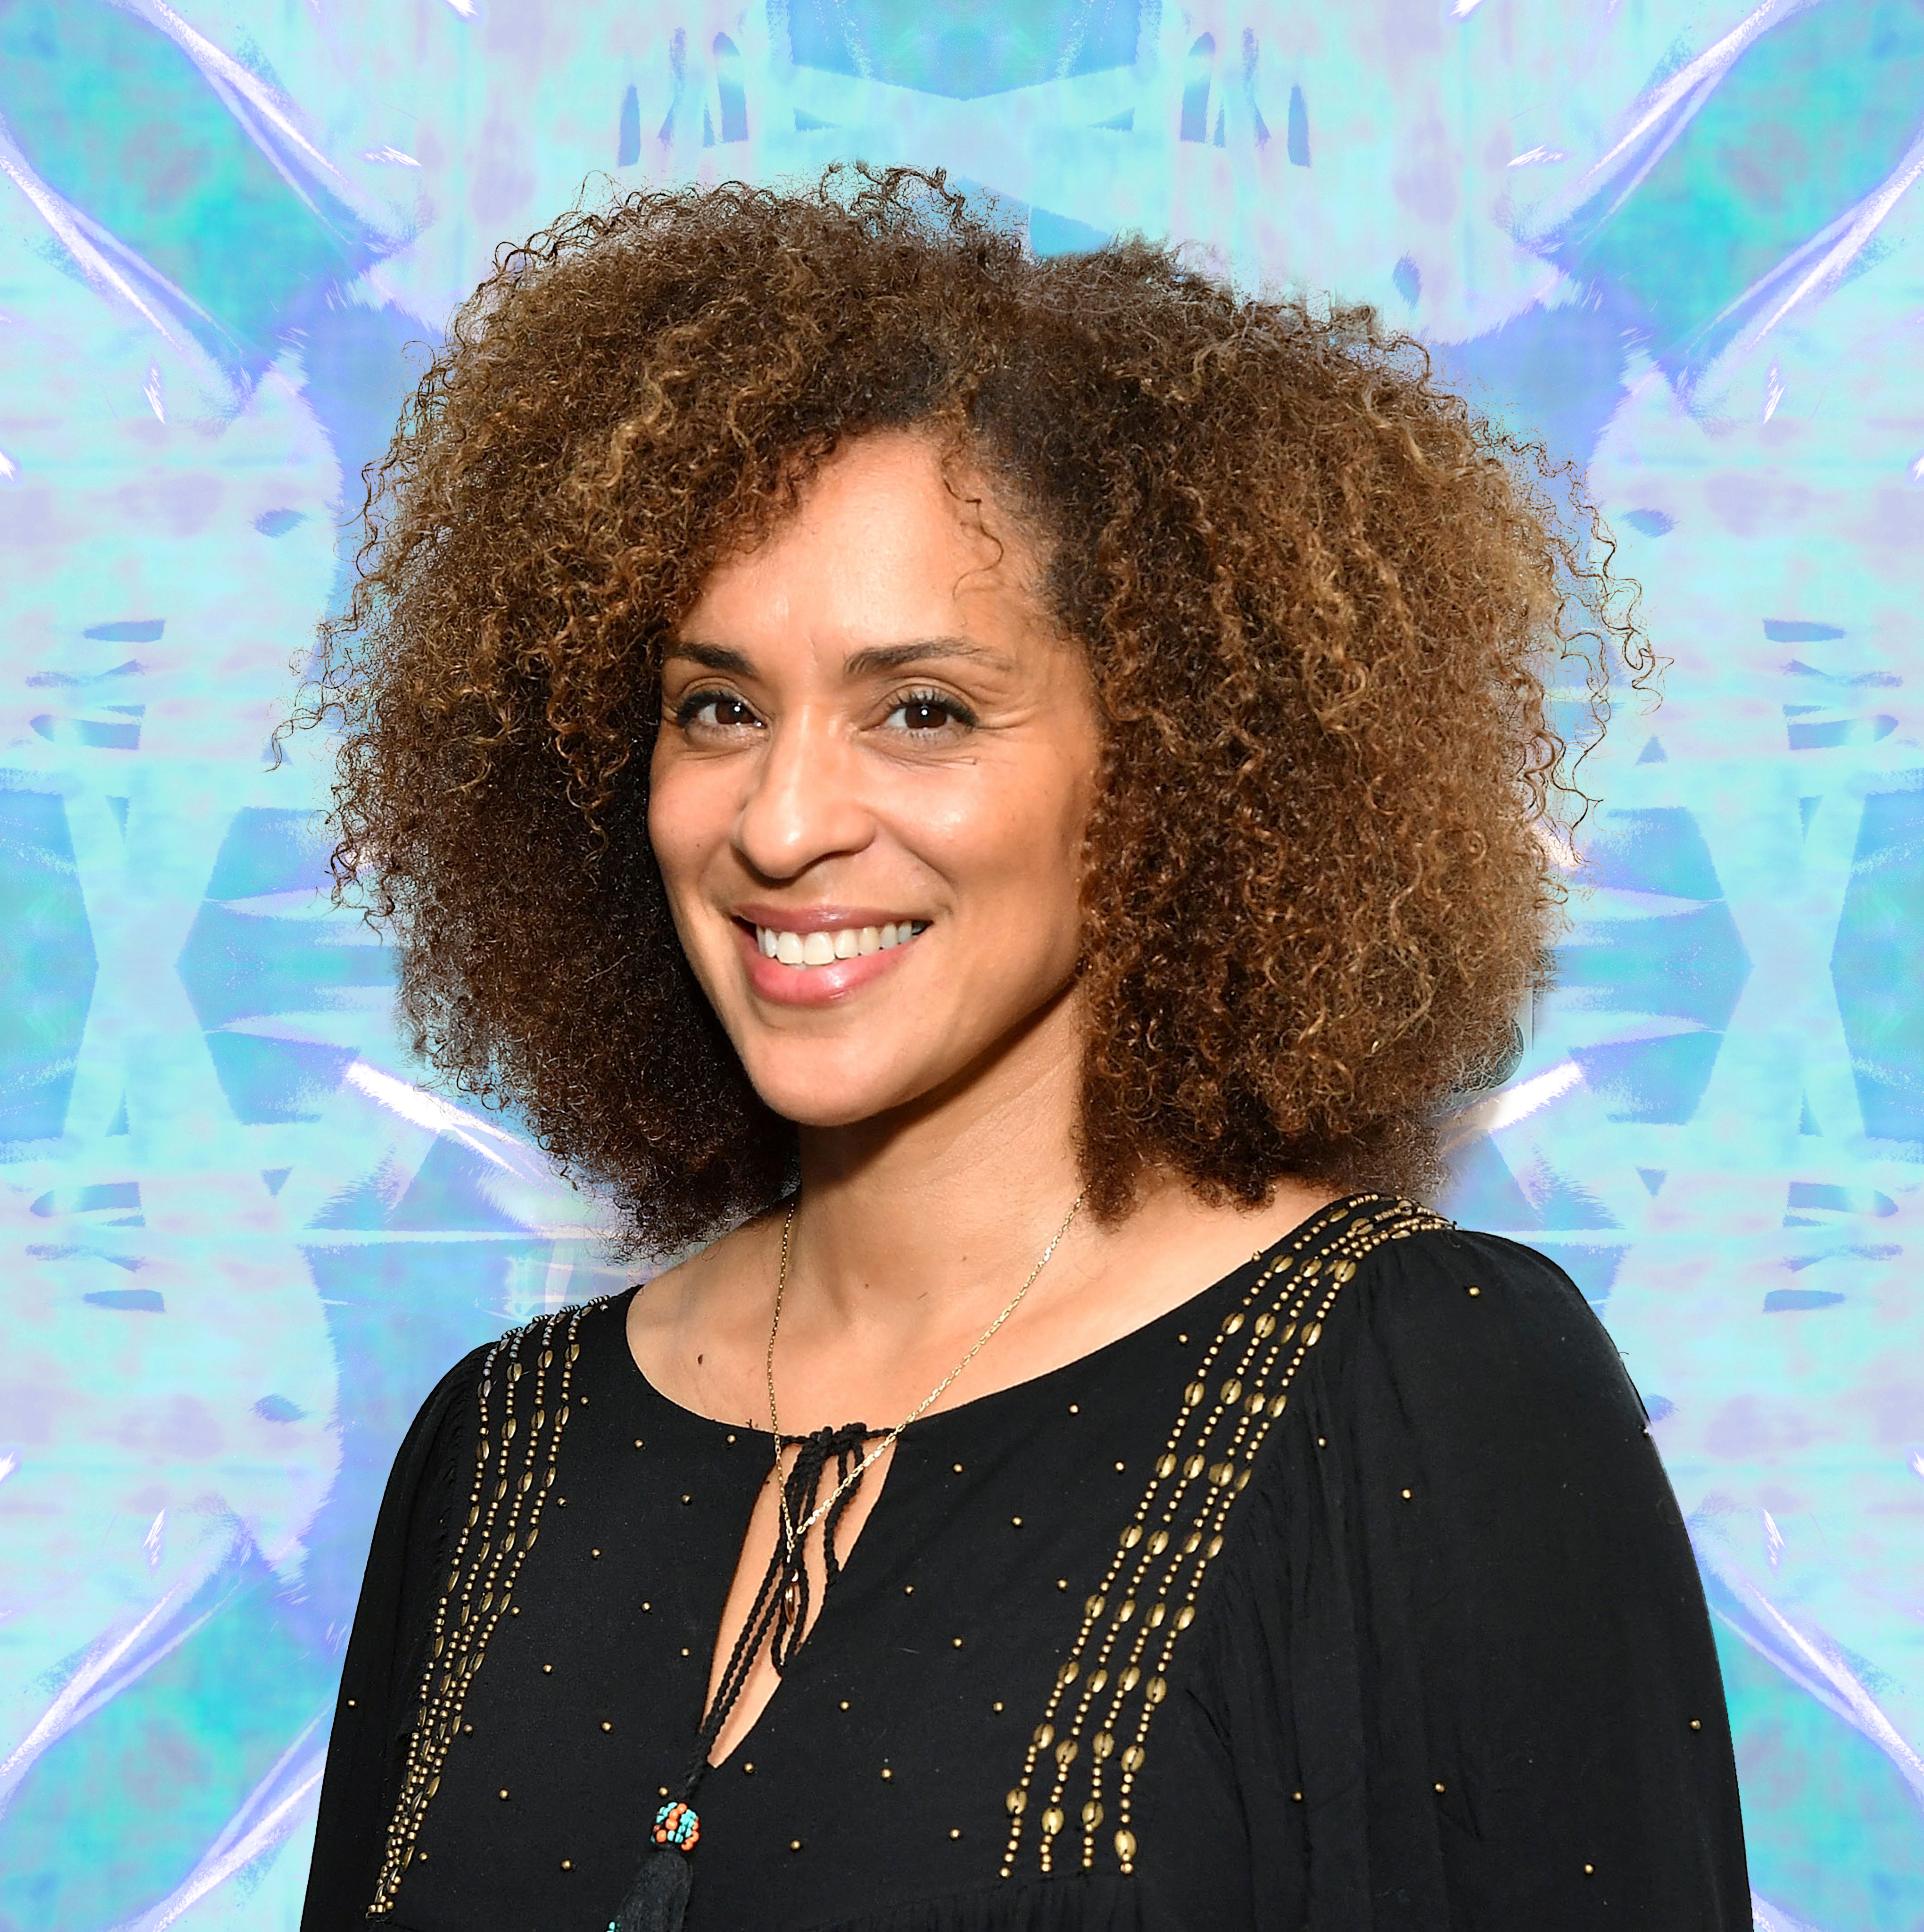 How Karyn Parsons Is Funding Her Dream Of Bringing Stories Of African-American Achievement To Children
